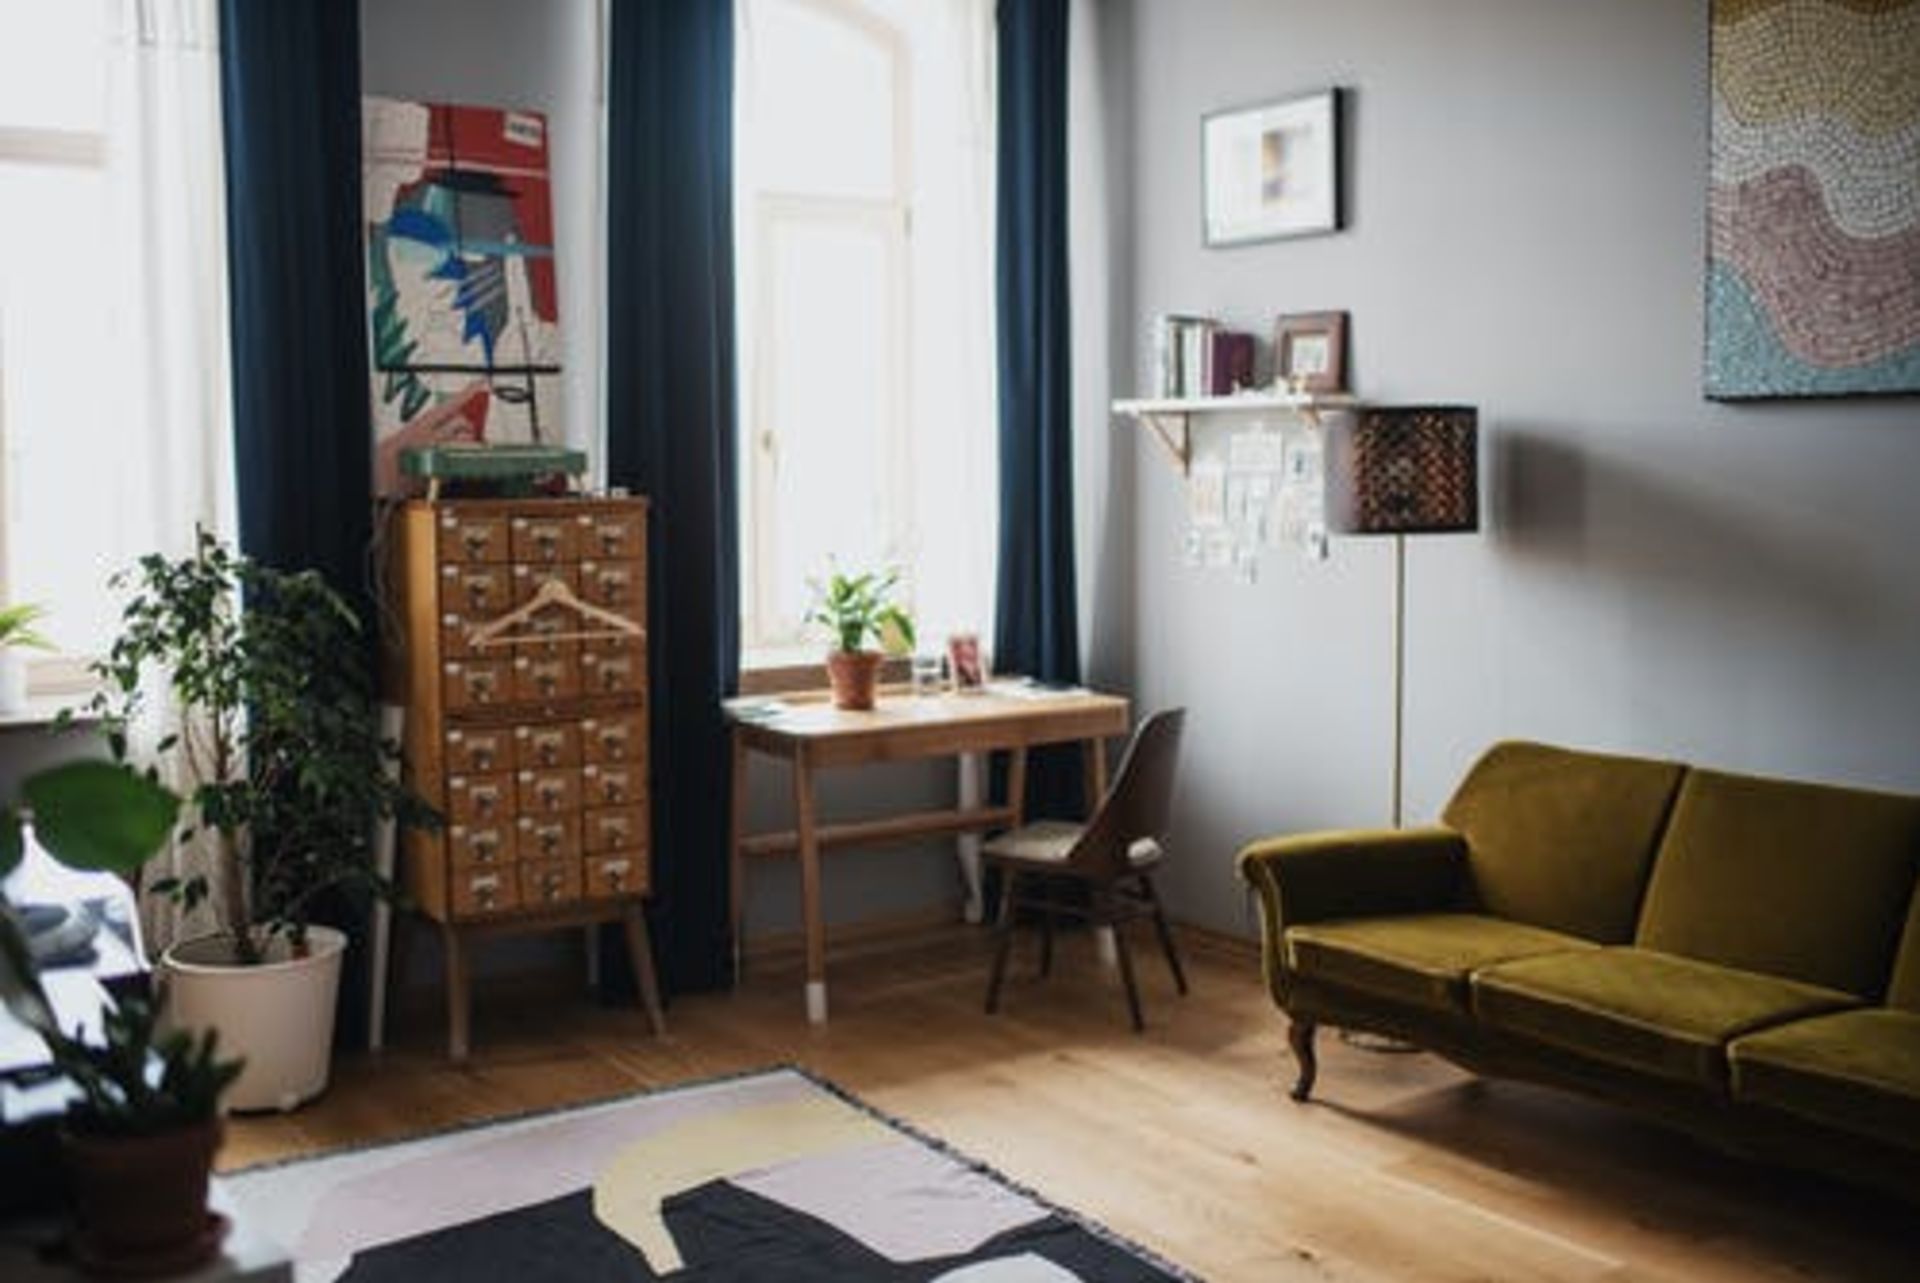 11 Ways to Maximize a Small Living Space